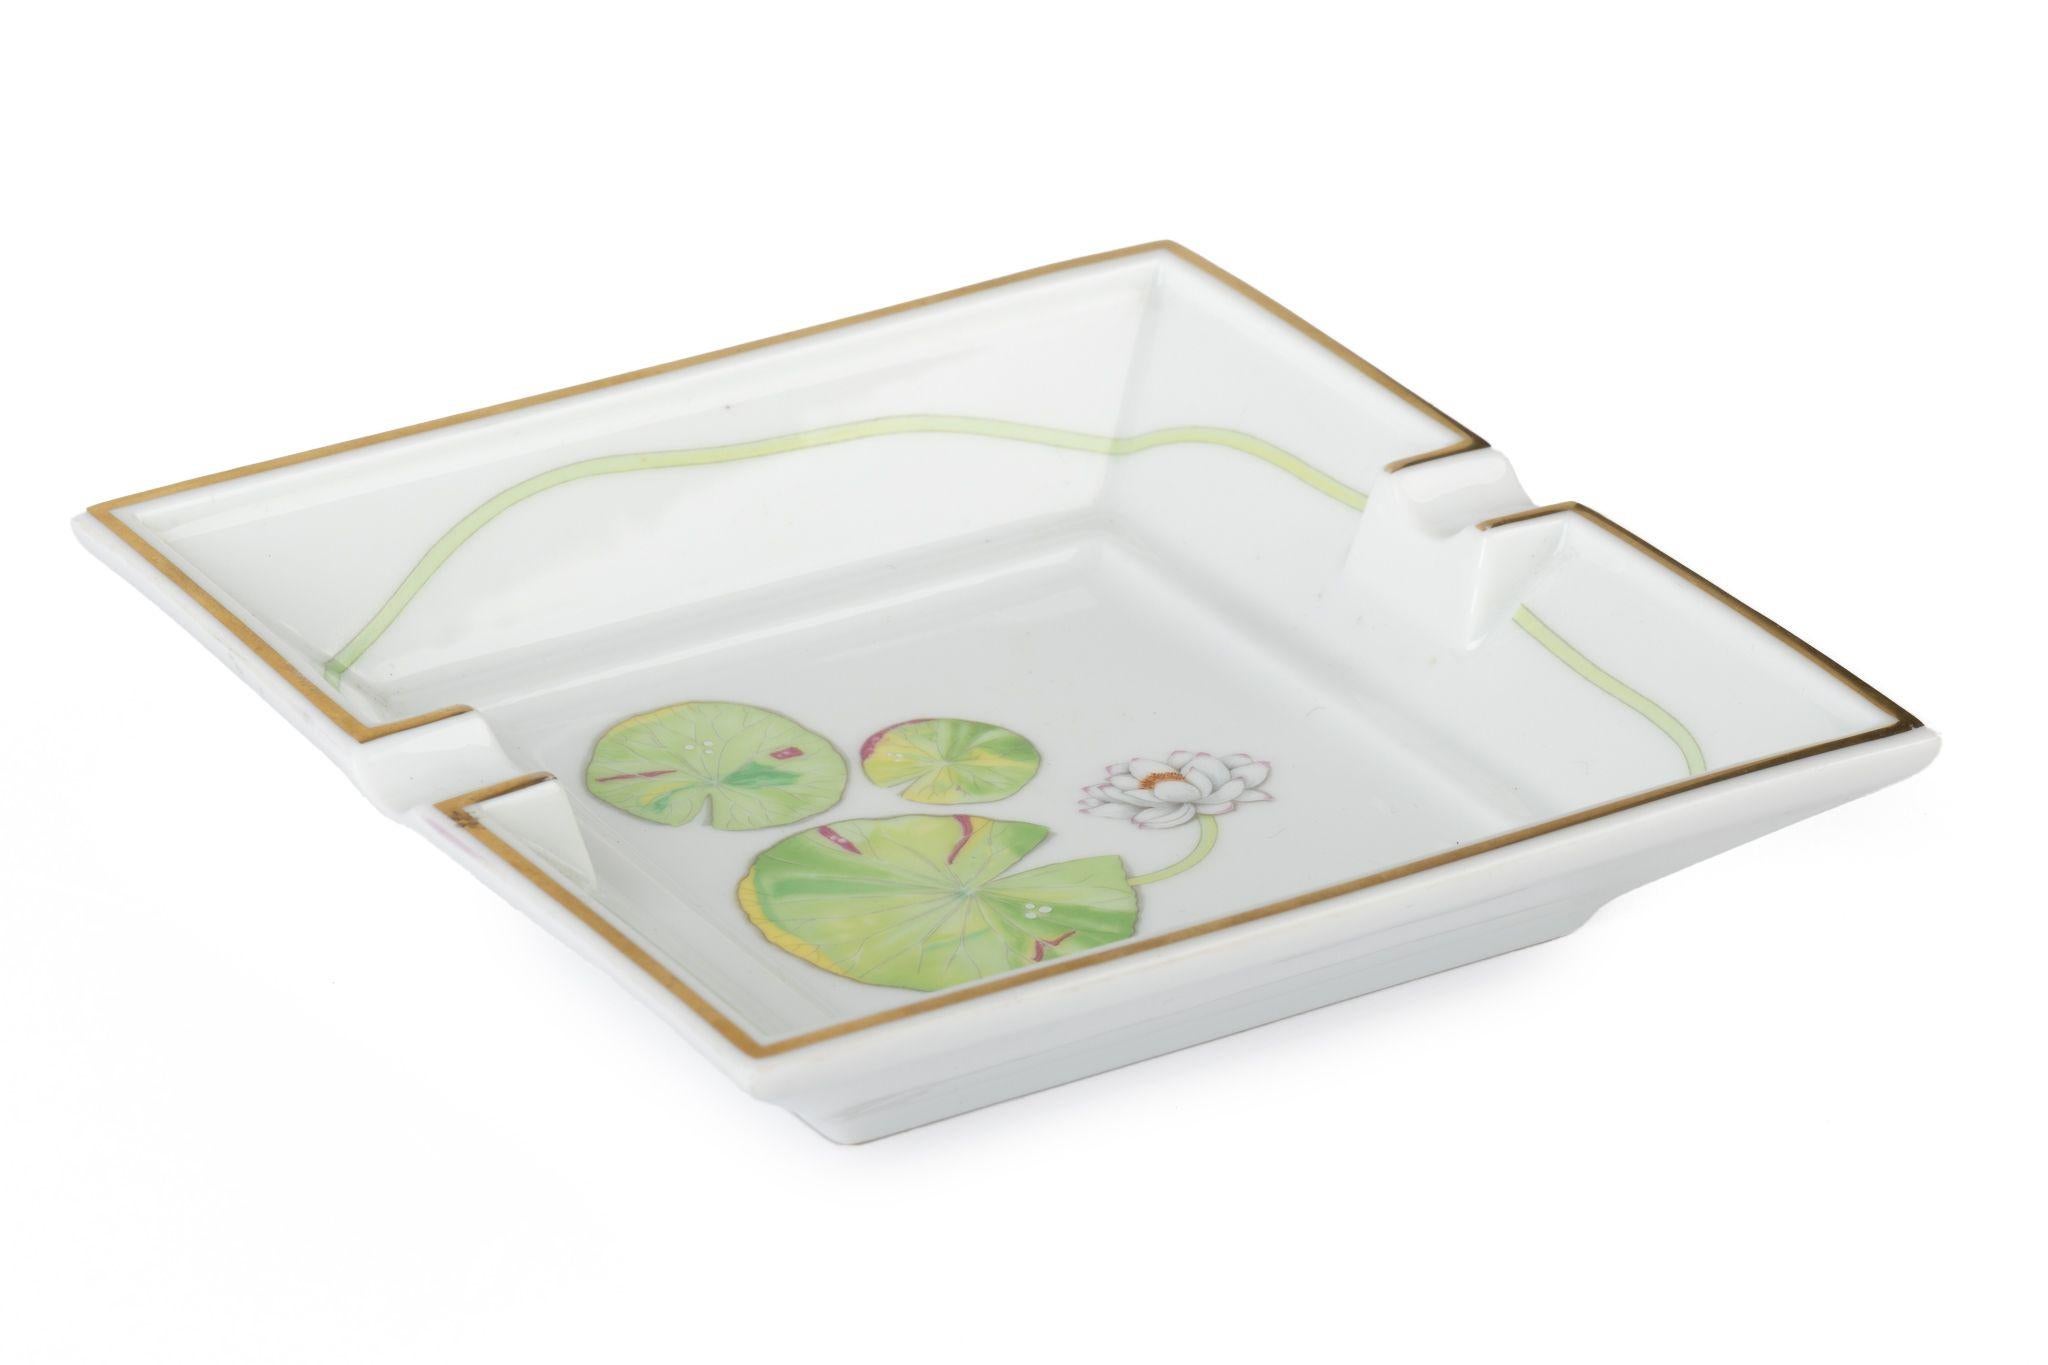 Hermès signature ashtray in white porcelain with a water lili design in white and green.